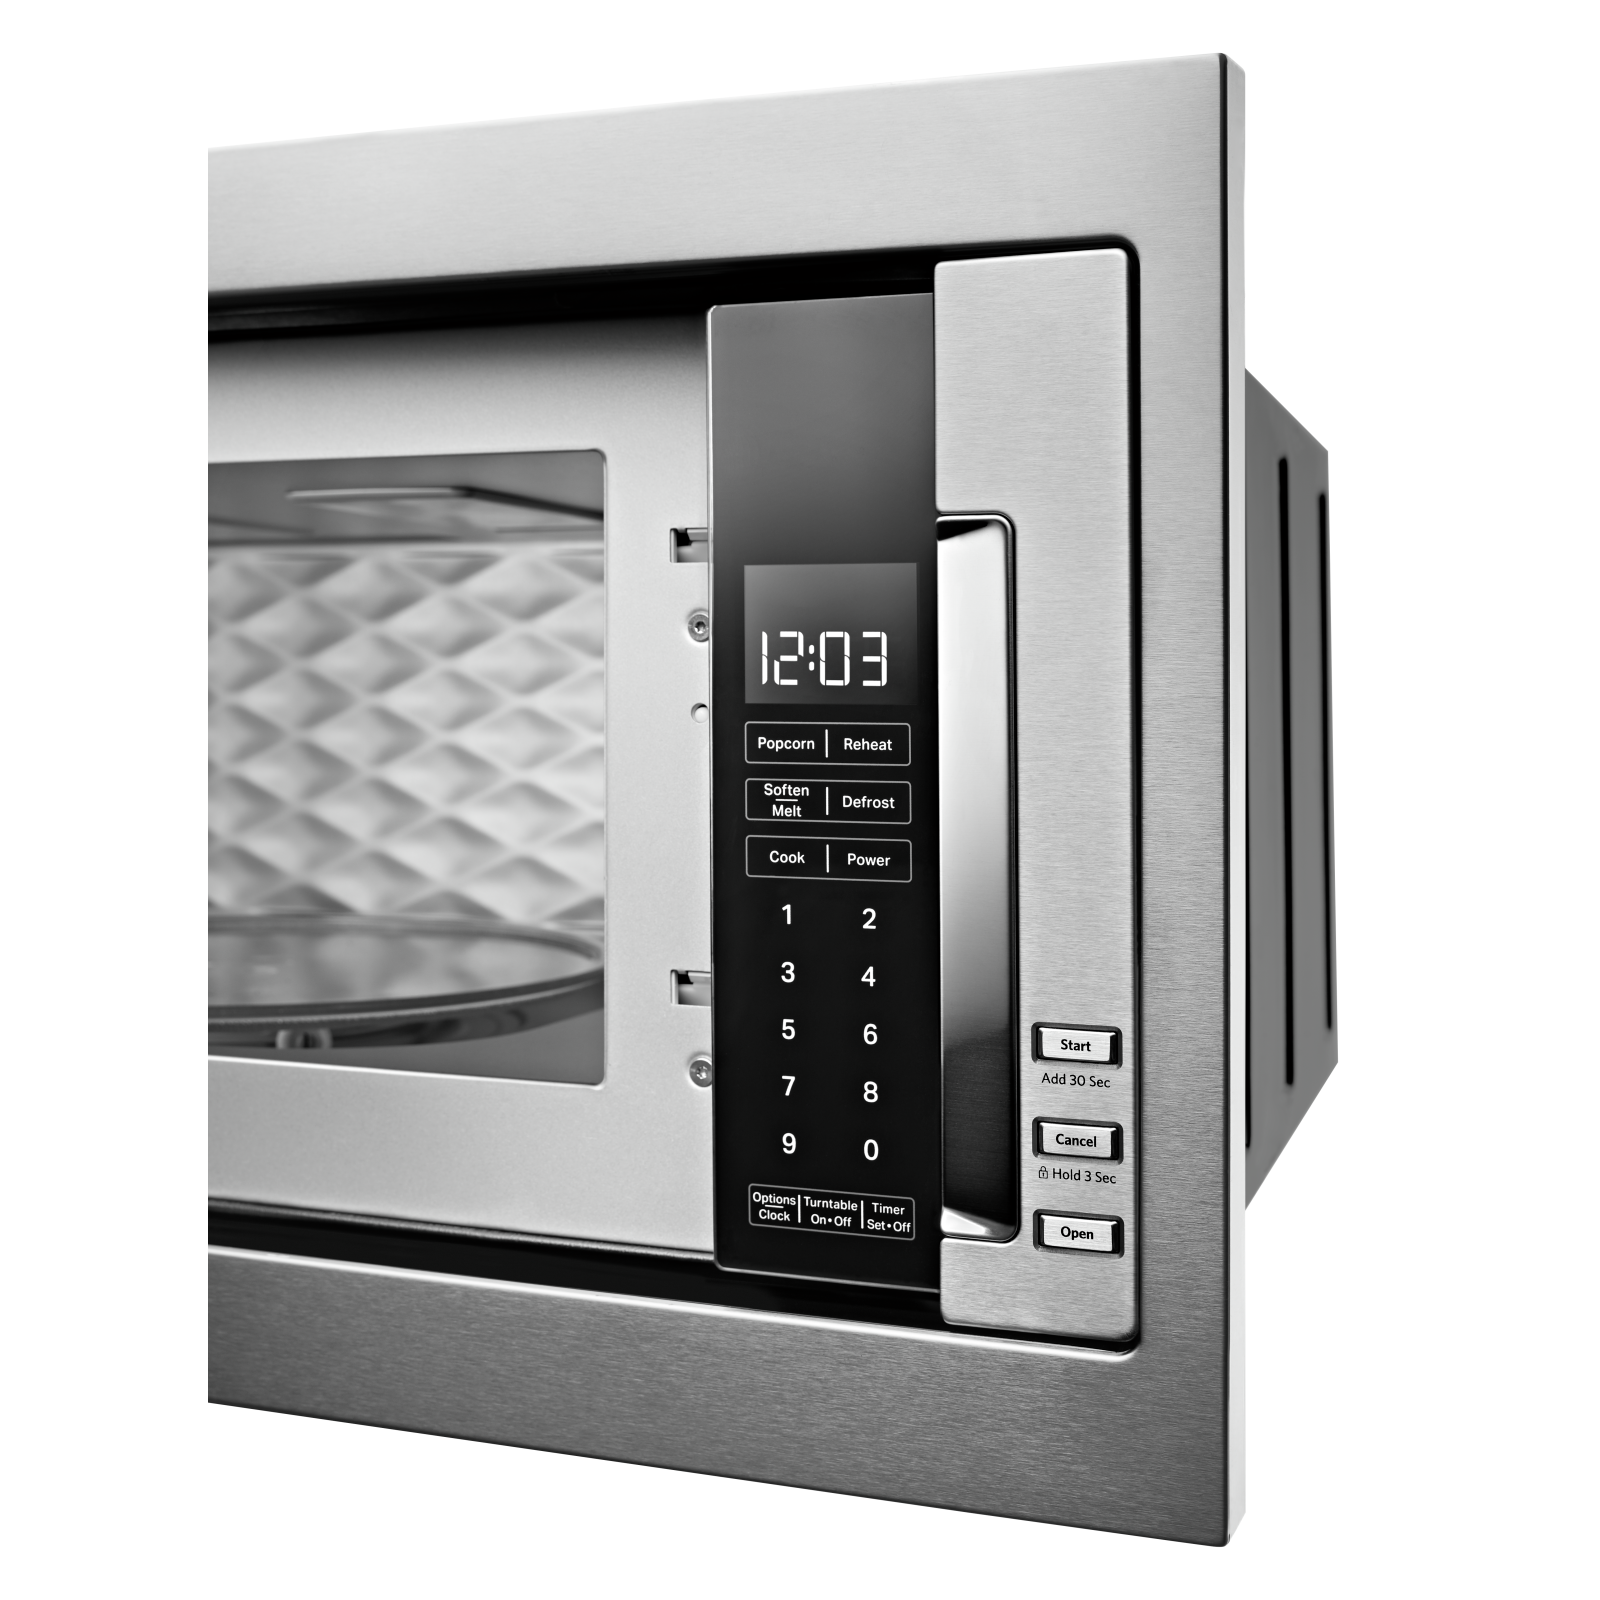 KitchenAid - 1.1 cu. Ft  Built In Microwave in Stainless - YKMBT5011KS